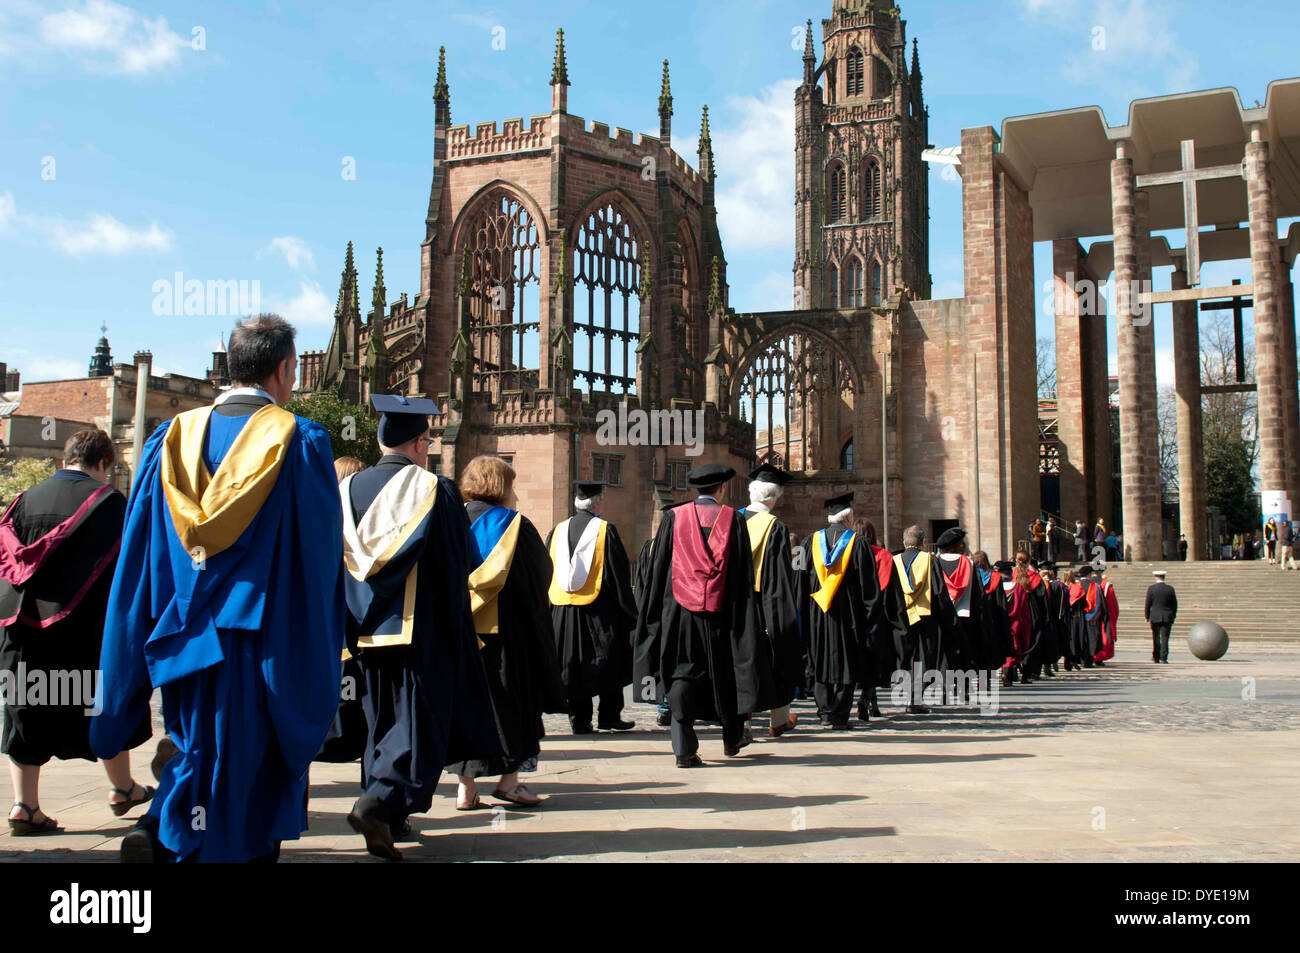 Procession of academics, Coventry University Graduation Day at Coventry Cathedral, England, UK Stock Photo